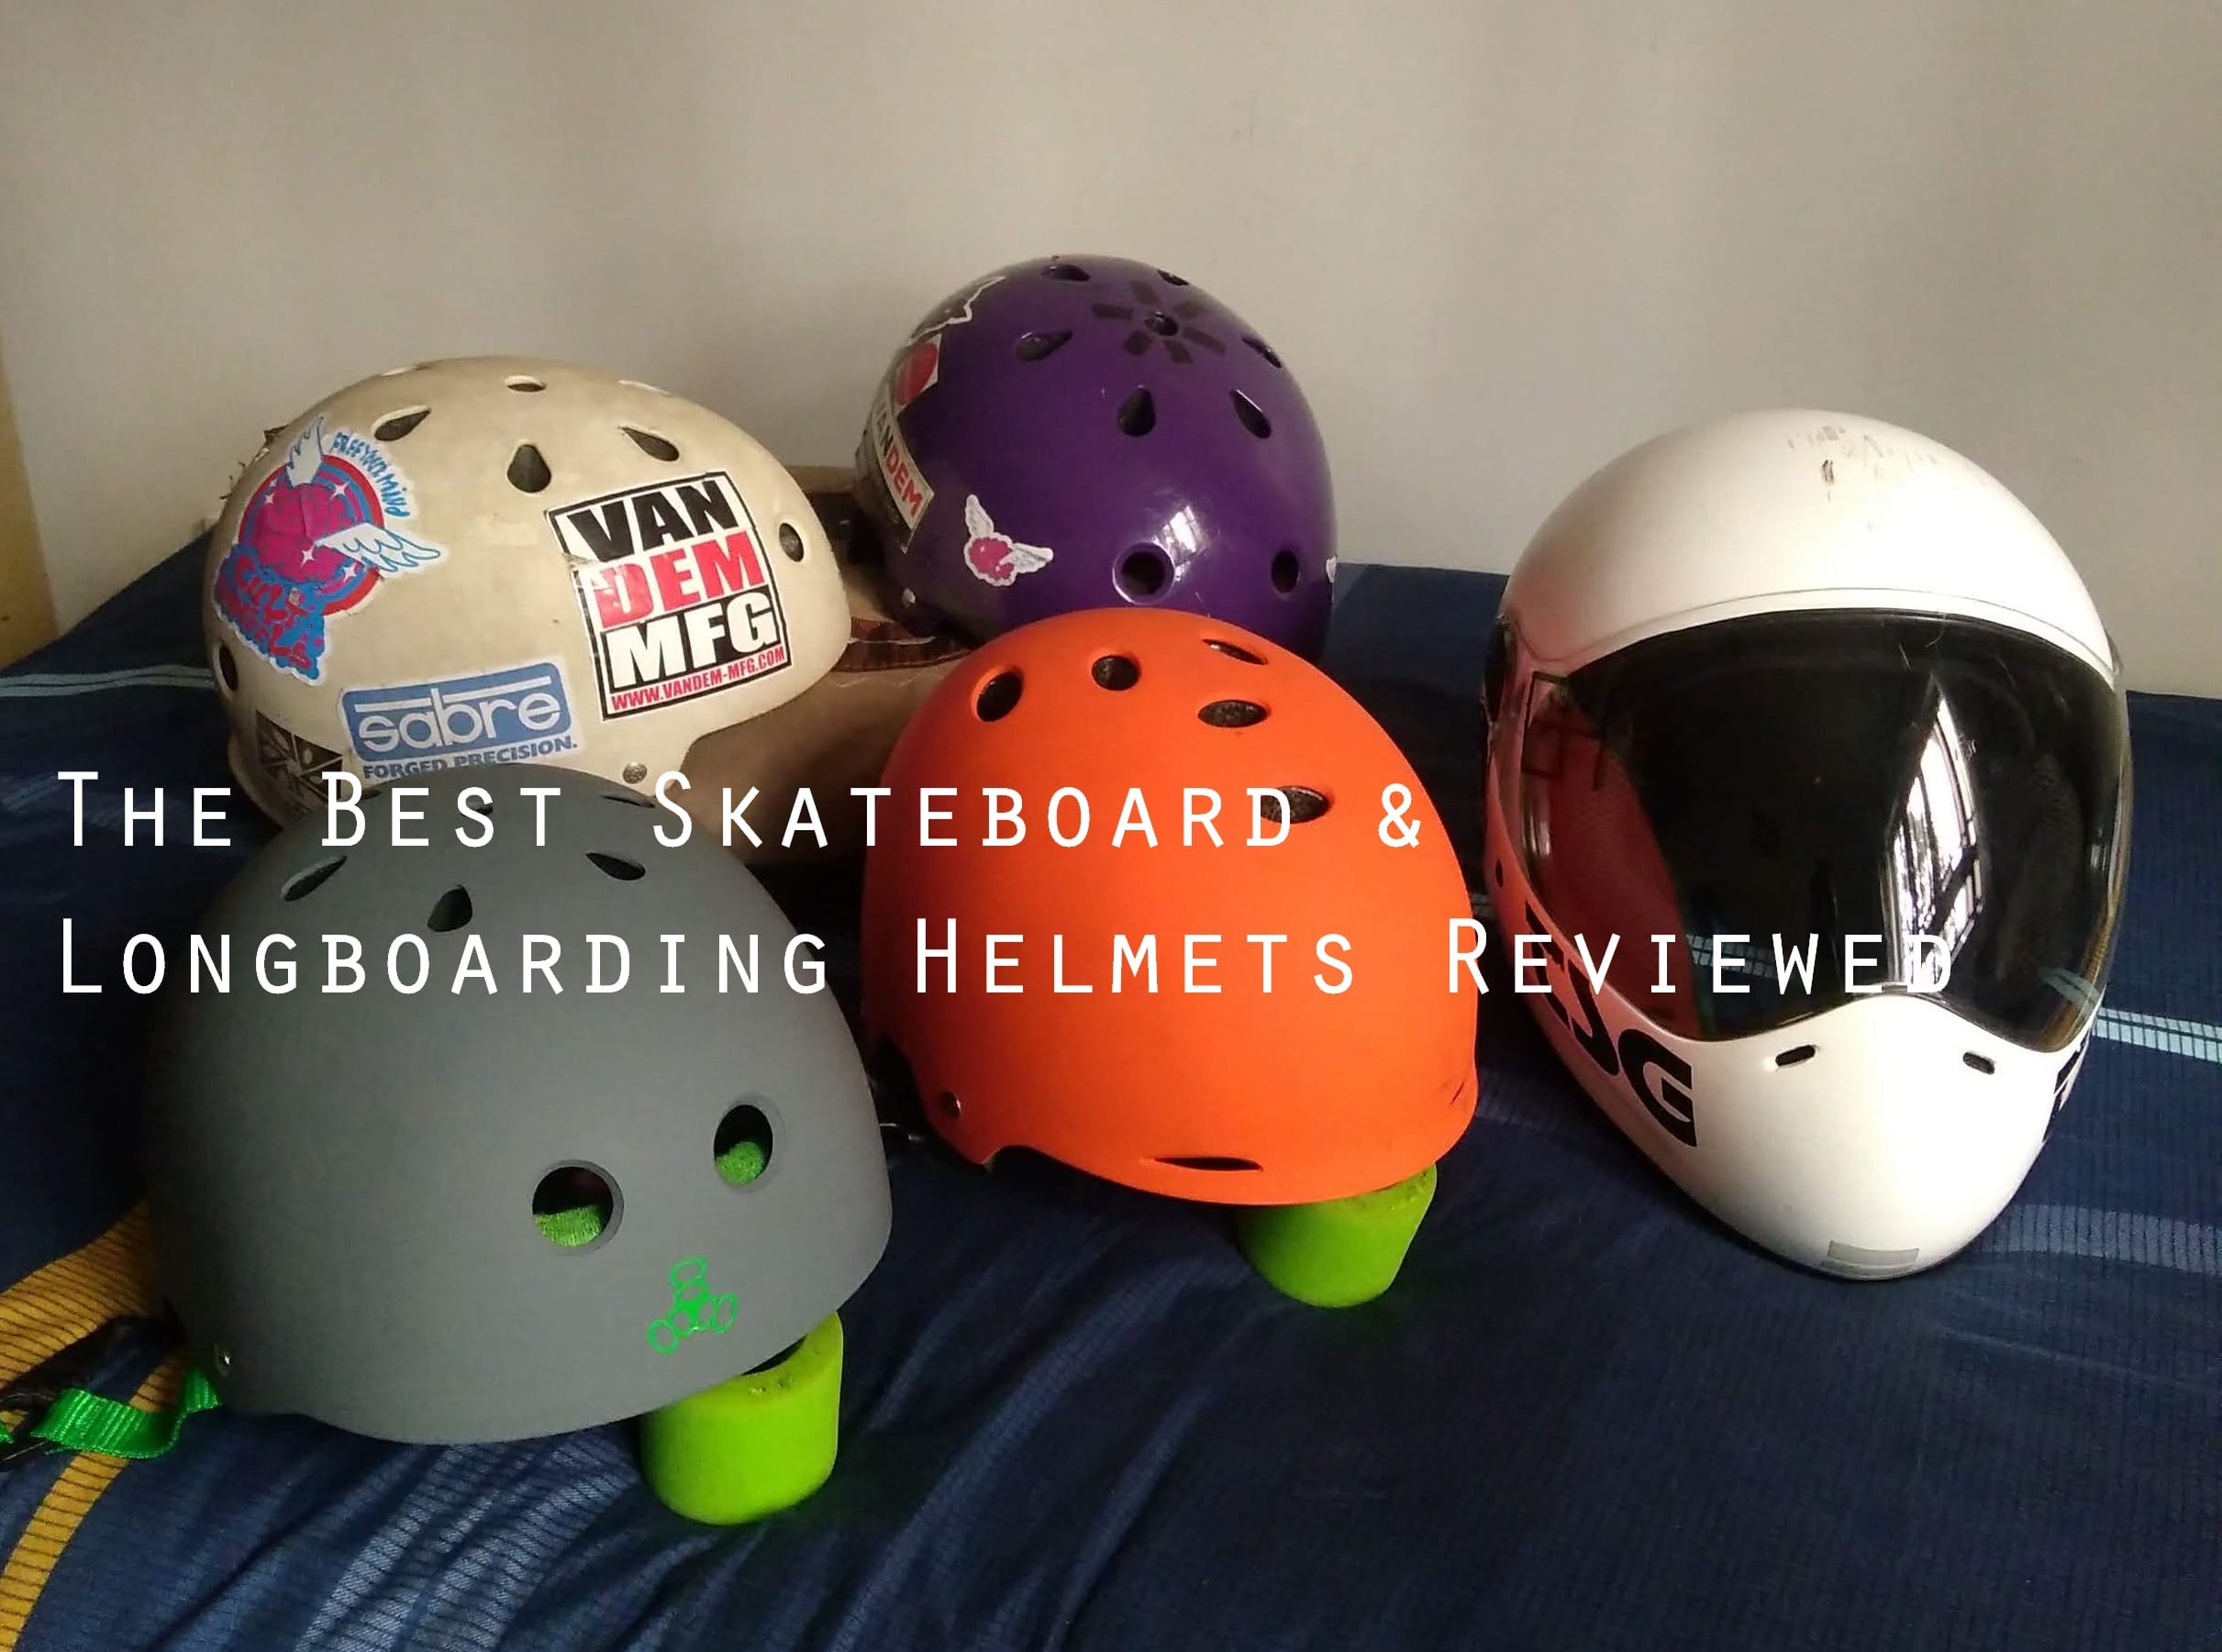 11 best helmets for longboarding/skating and the ones to avoid - Downhill254